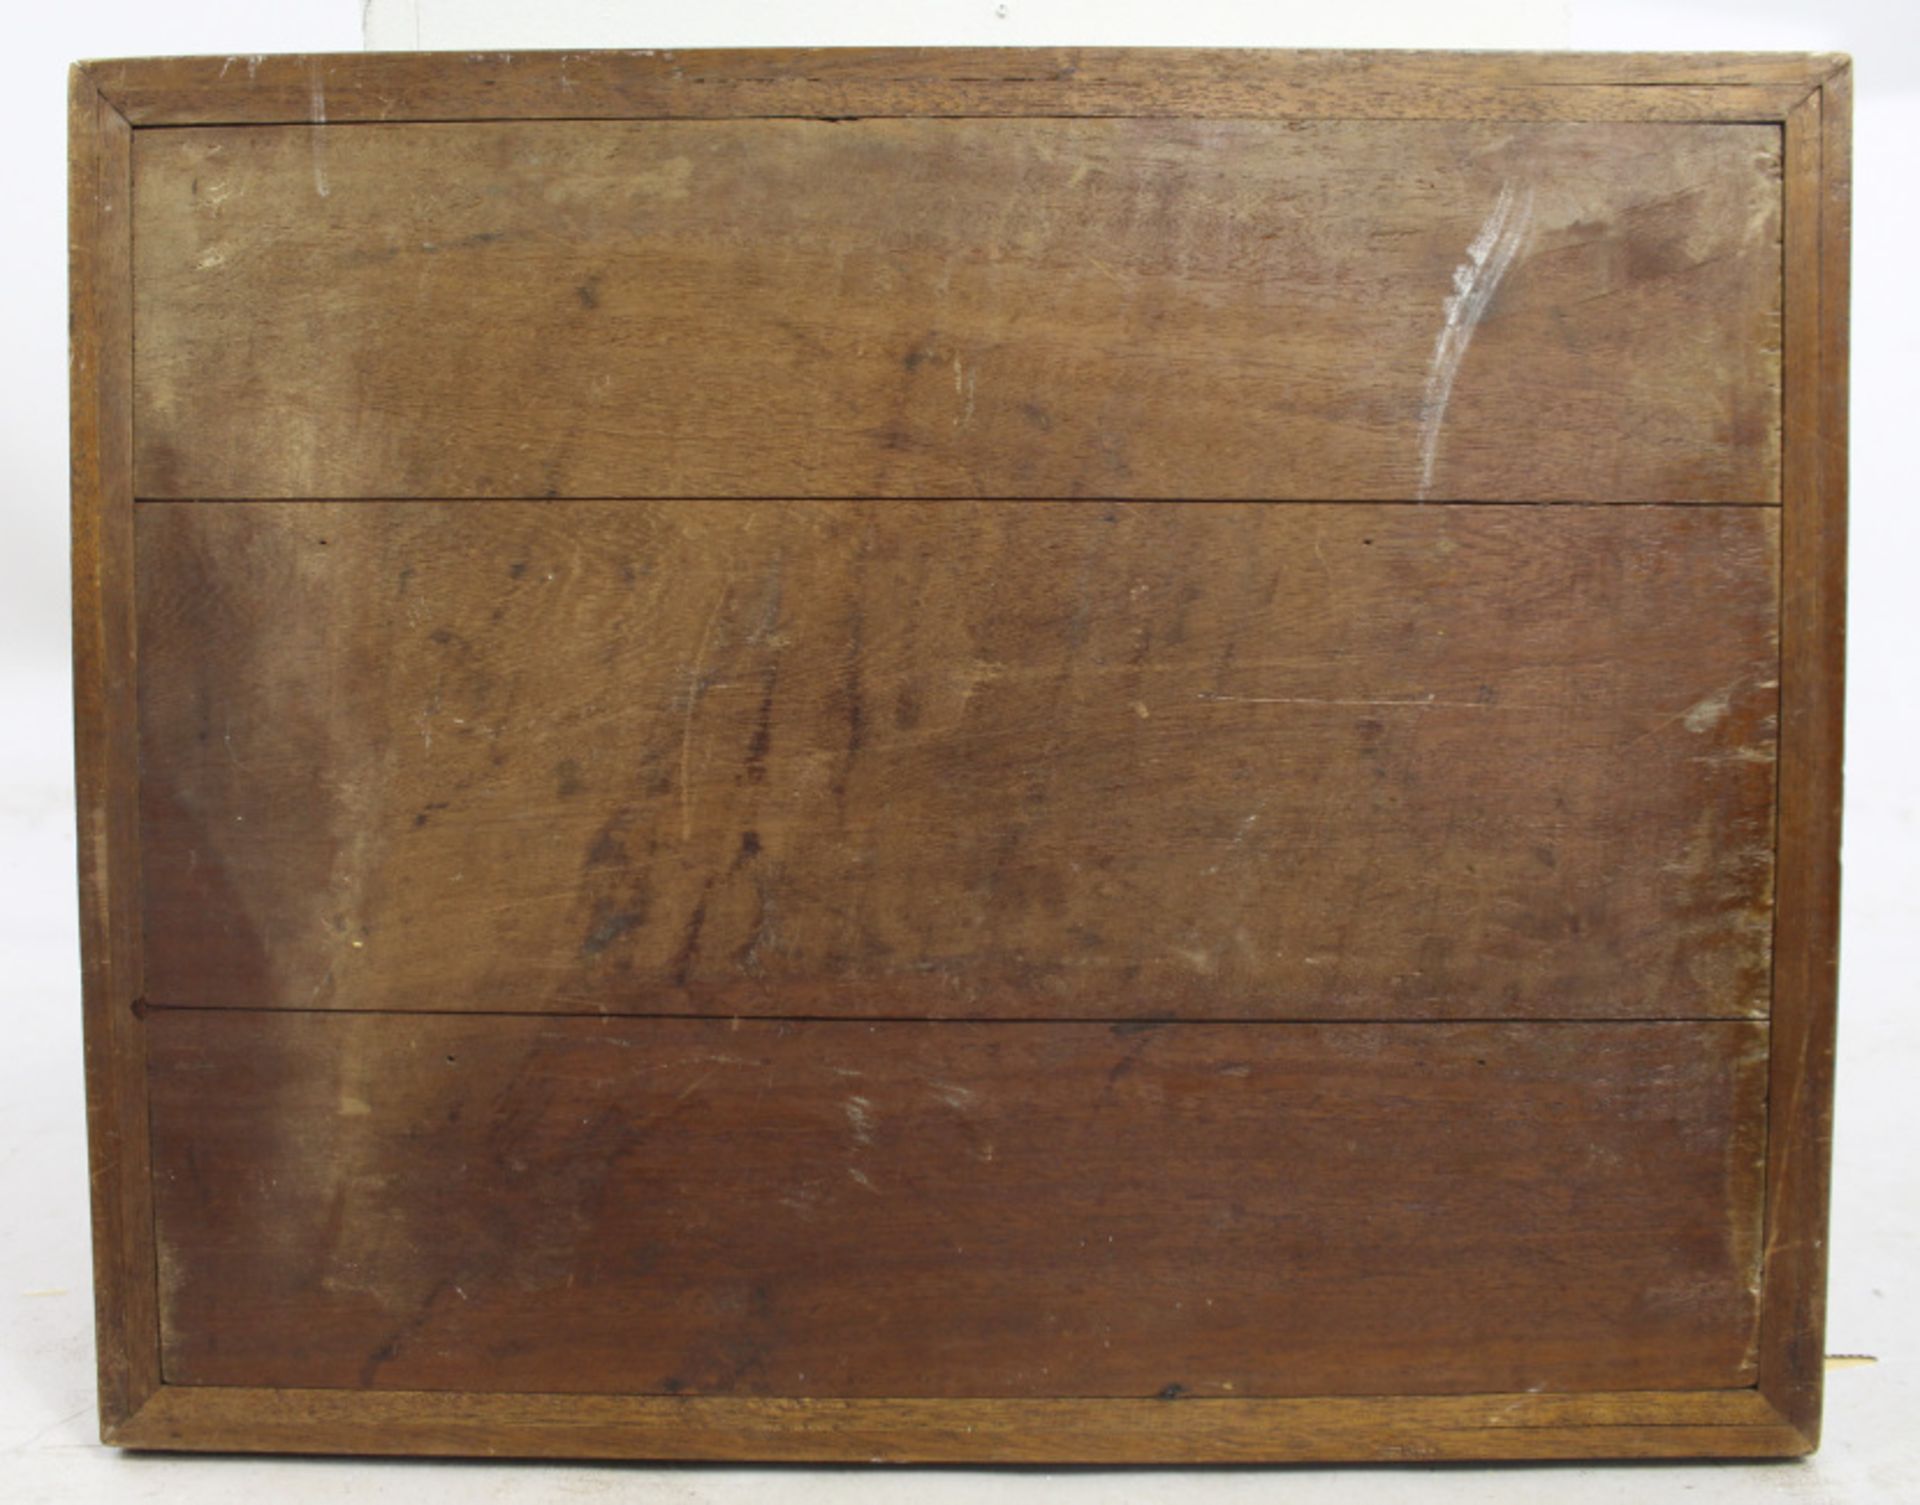 Carved Wooden Tray - Image 2 of 5